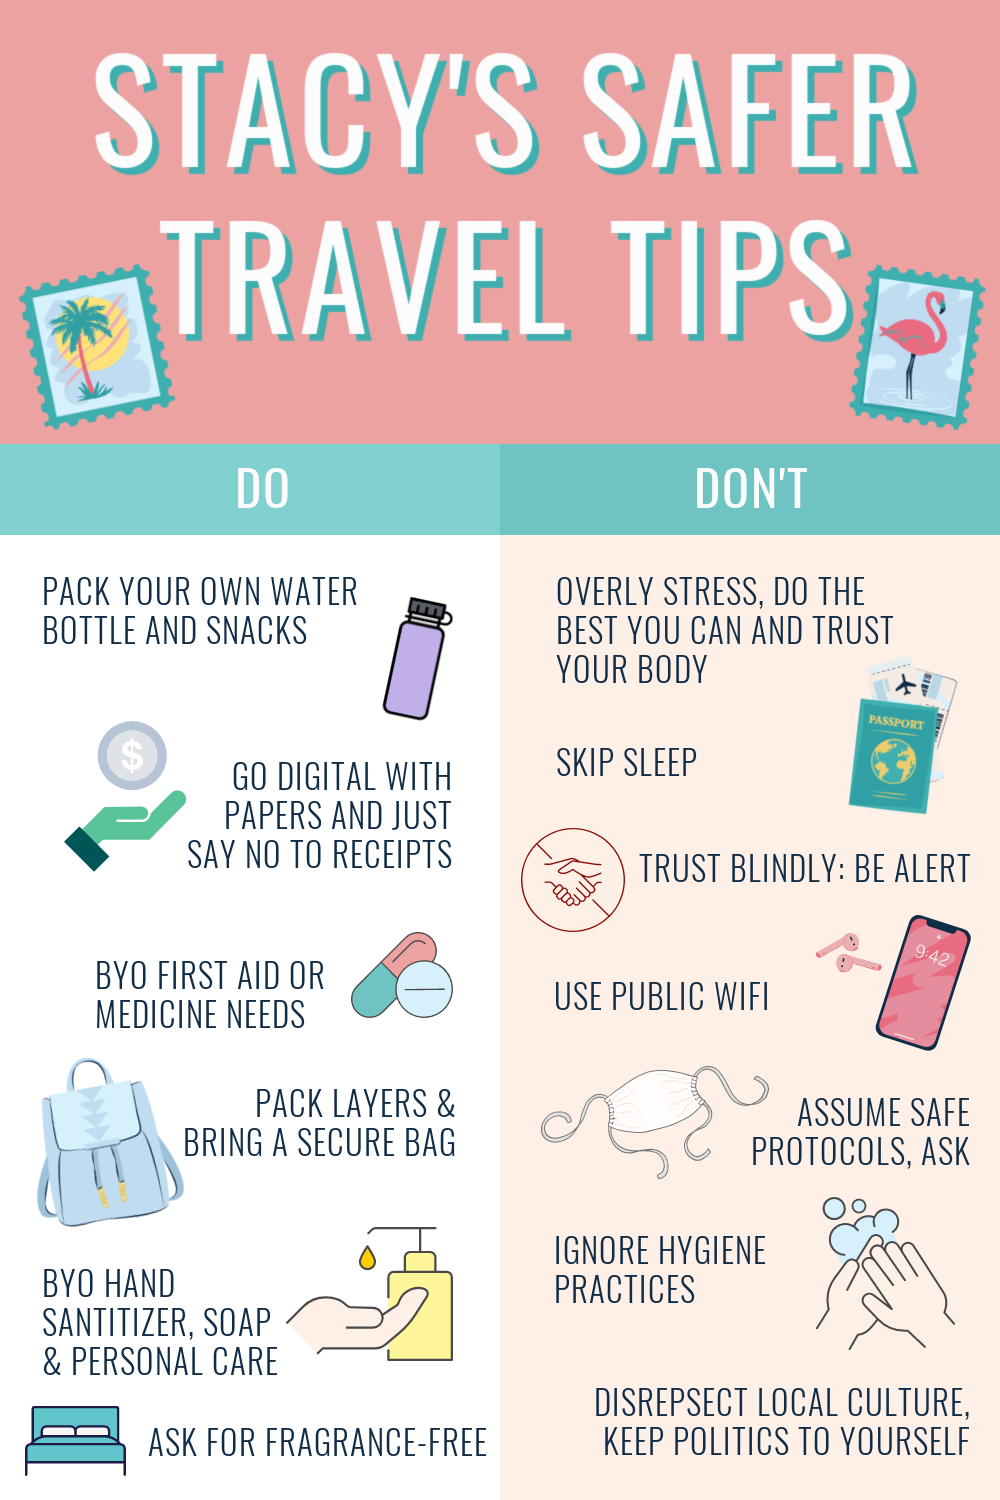 Pin on Travel hacks and needs to survive